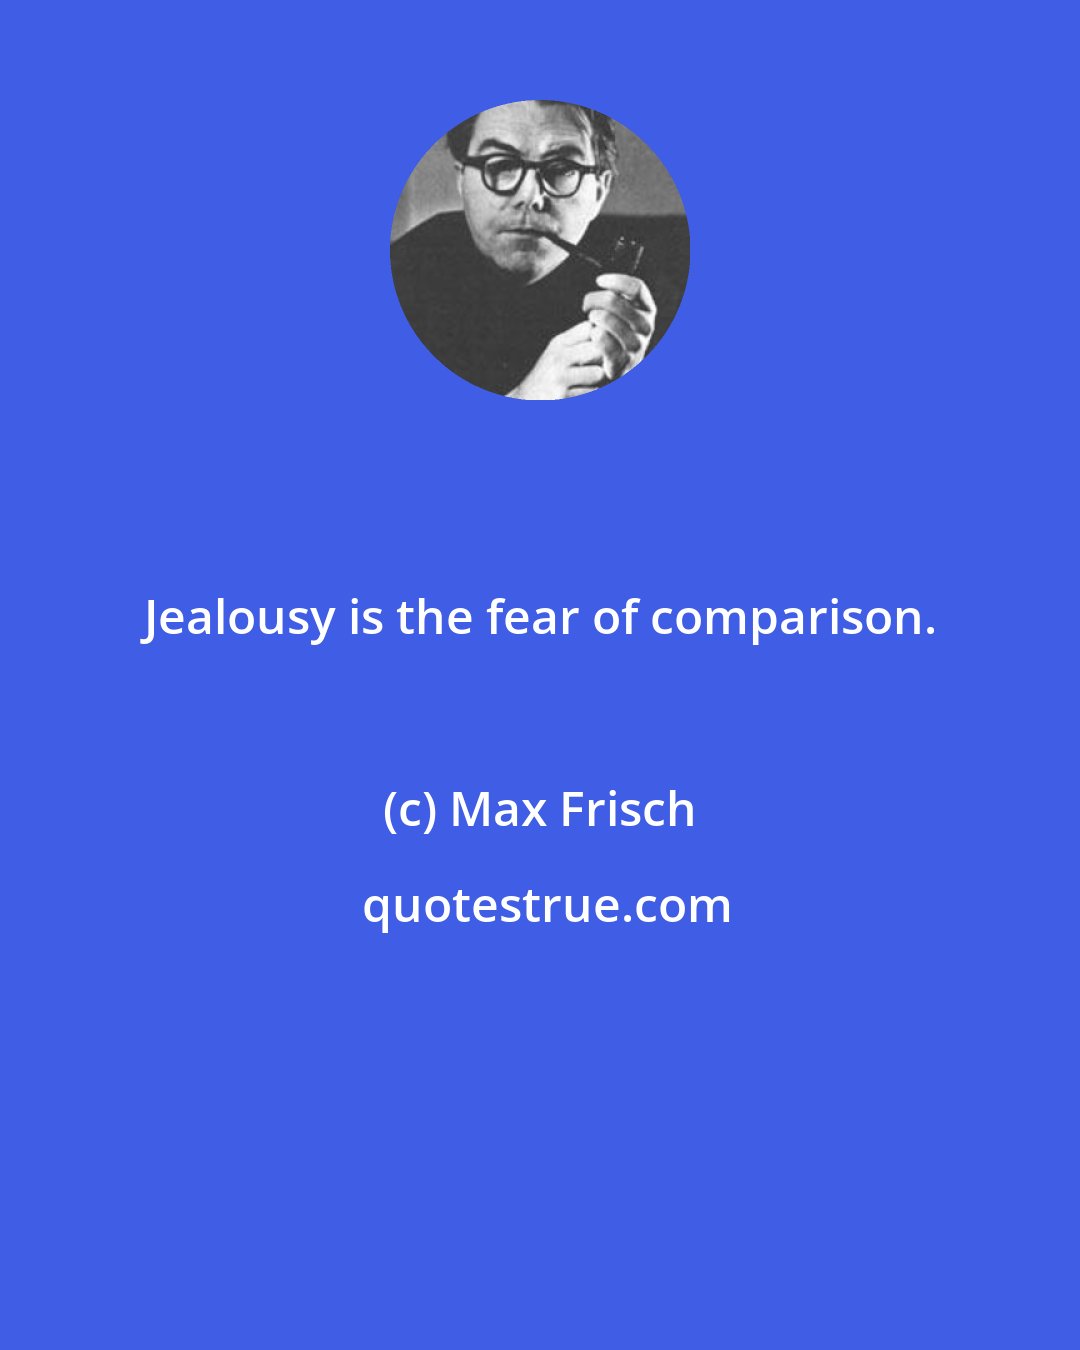 Max Frisch: Jealousy is the fear of comparison.